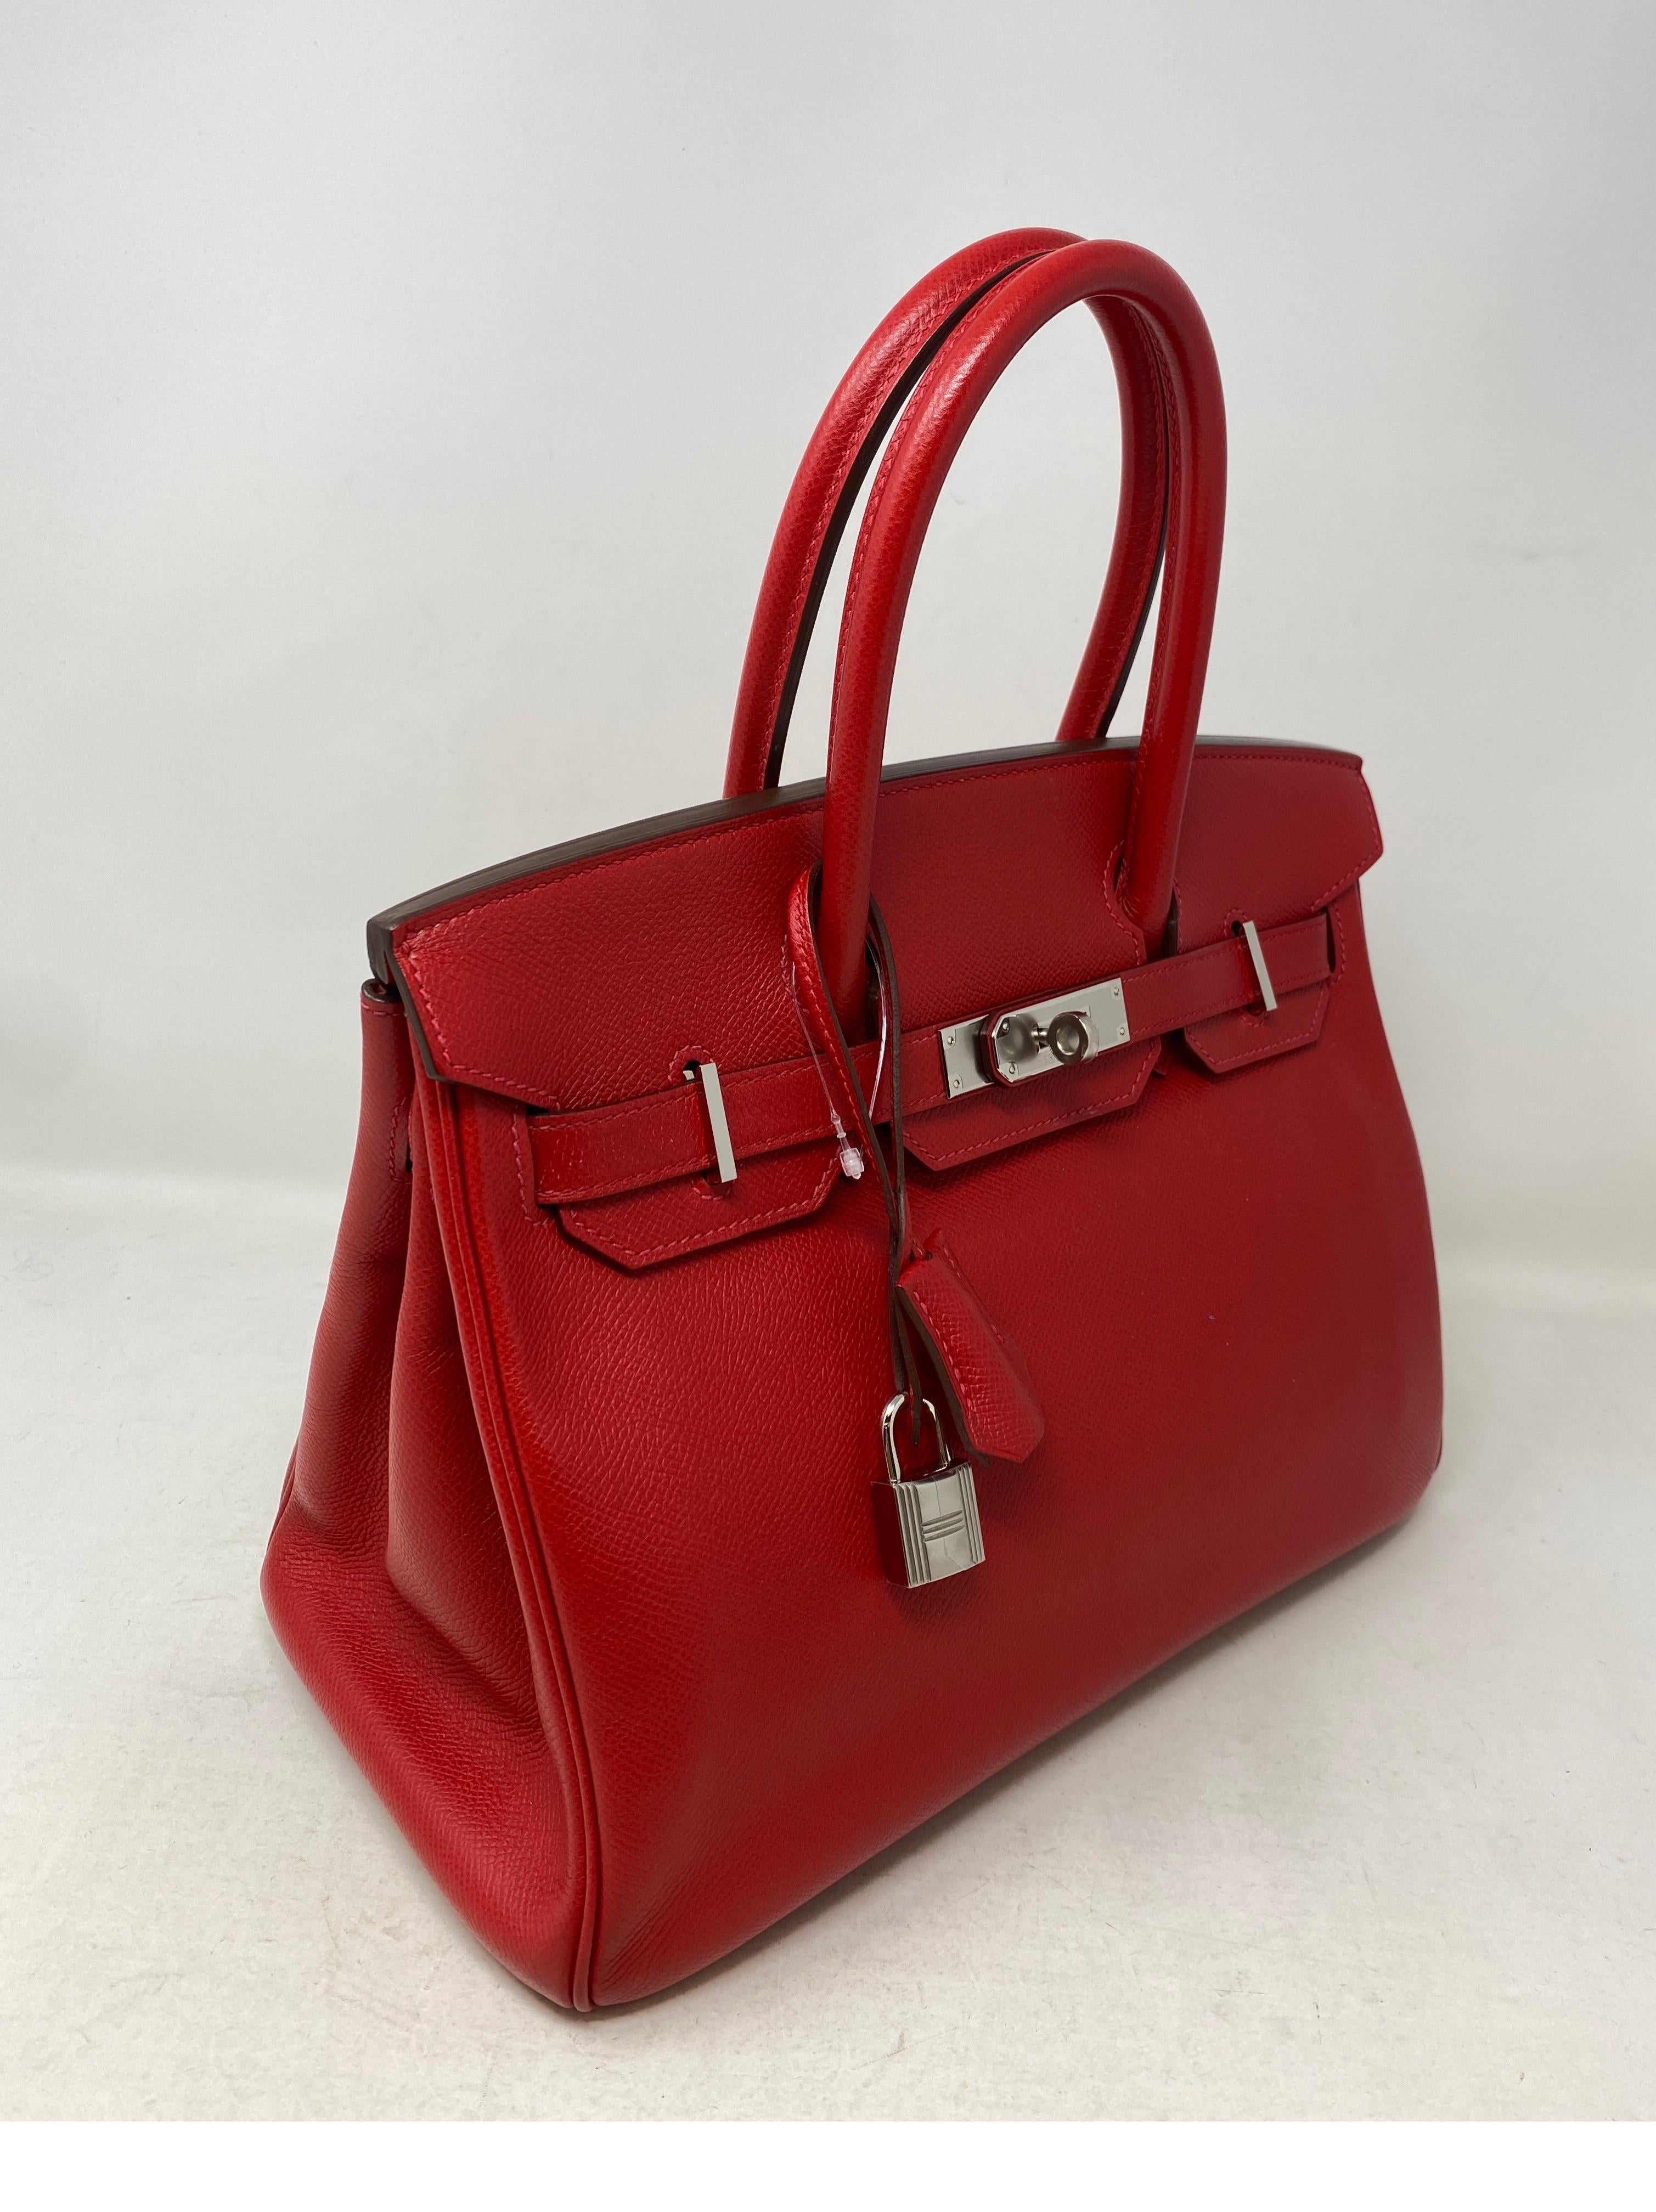 Hermes Rouge Casaque Birkin 30 Bag. Palladium hardware. Excellent like new condition. Plastic still on hardware. Rare 30 size. Great investment bag. Includes clochette, lock, keys, and dust cover. Guaranteed authentic. 